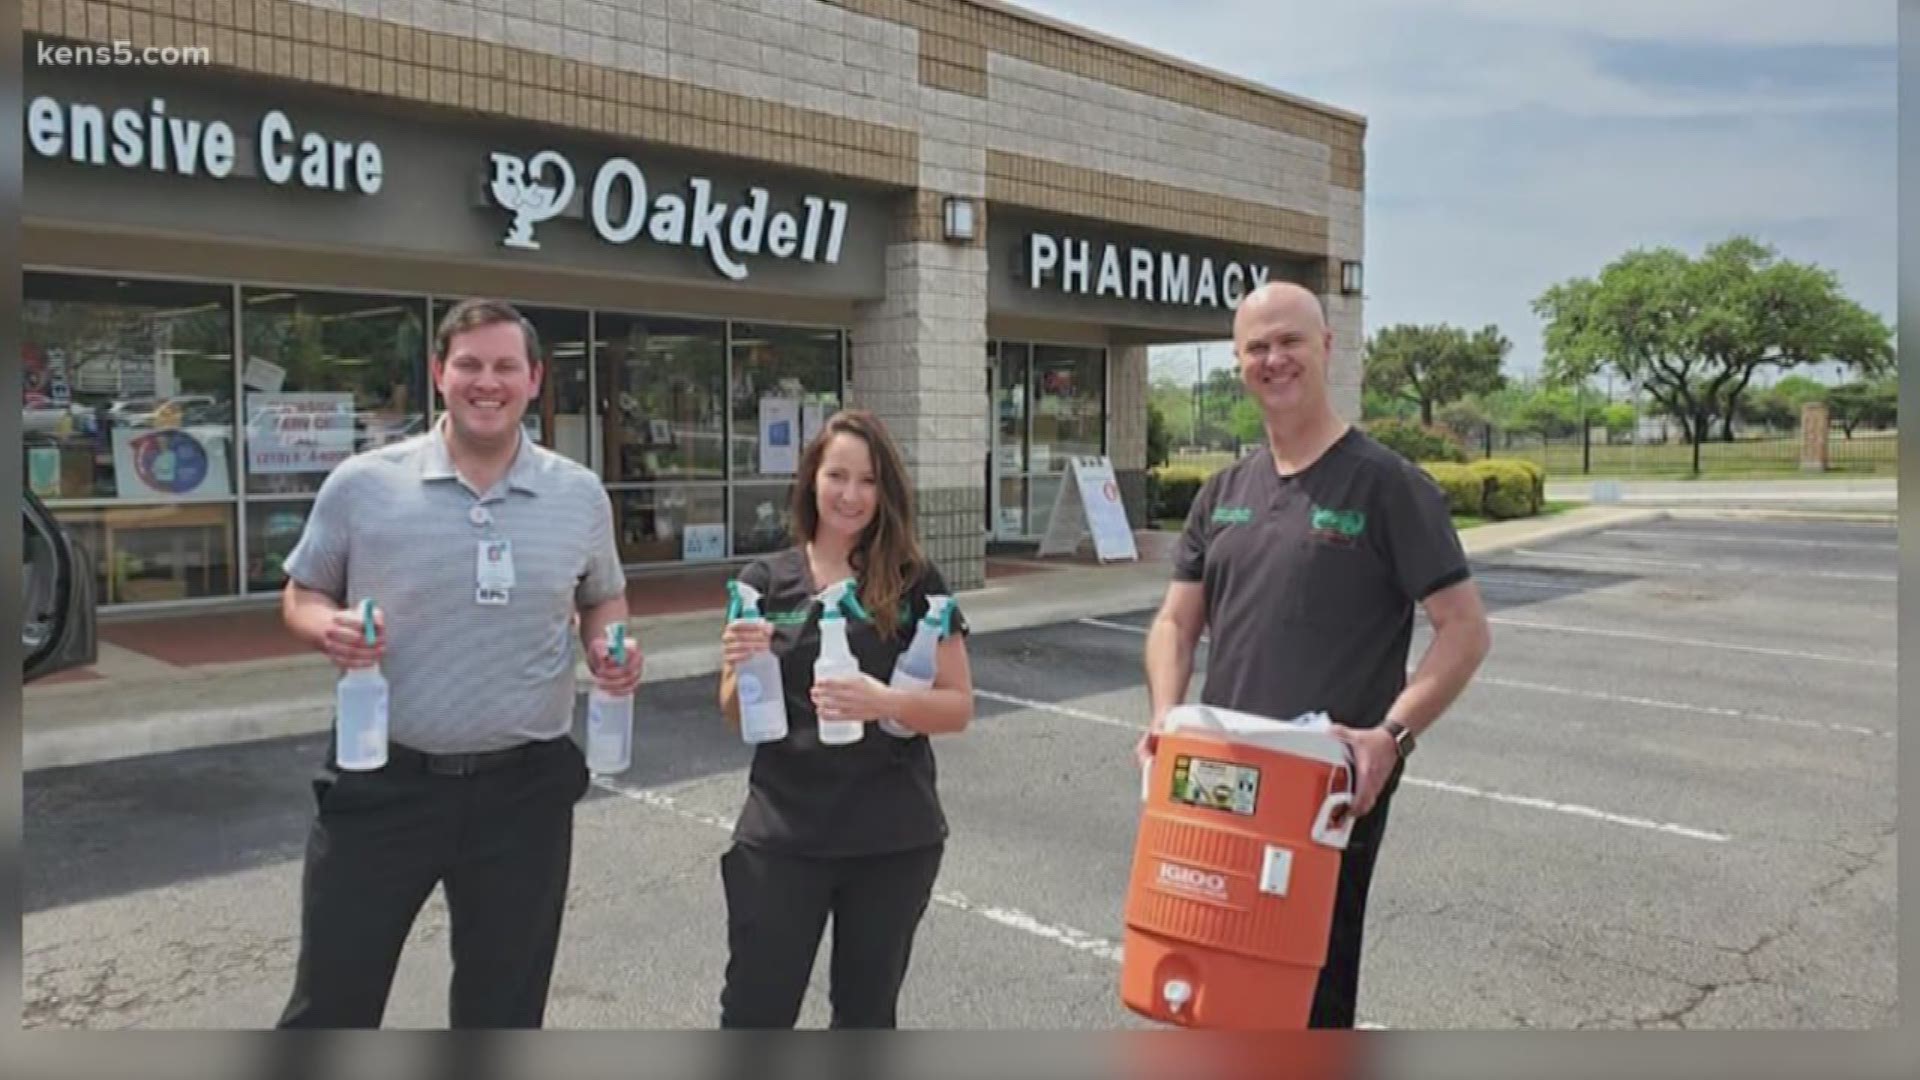 Jeff Carson runs Oakdell Pharmacy and he says right now isn't a time to panic, but come in and talk through what's going on.